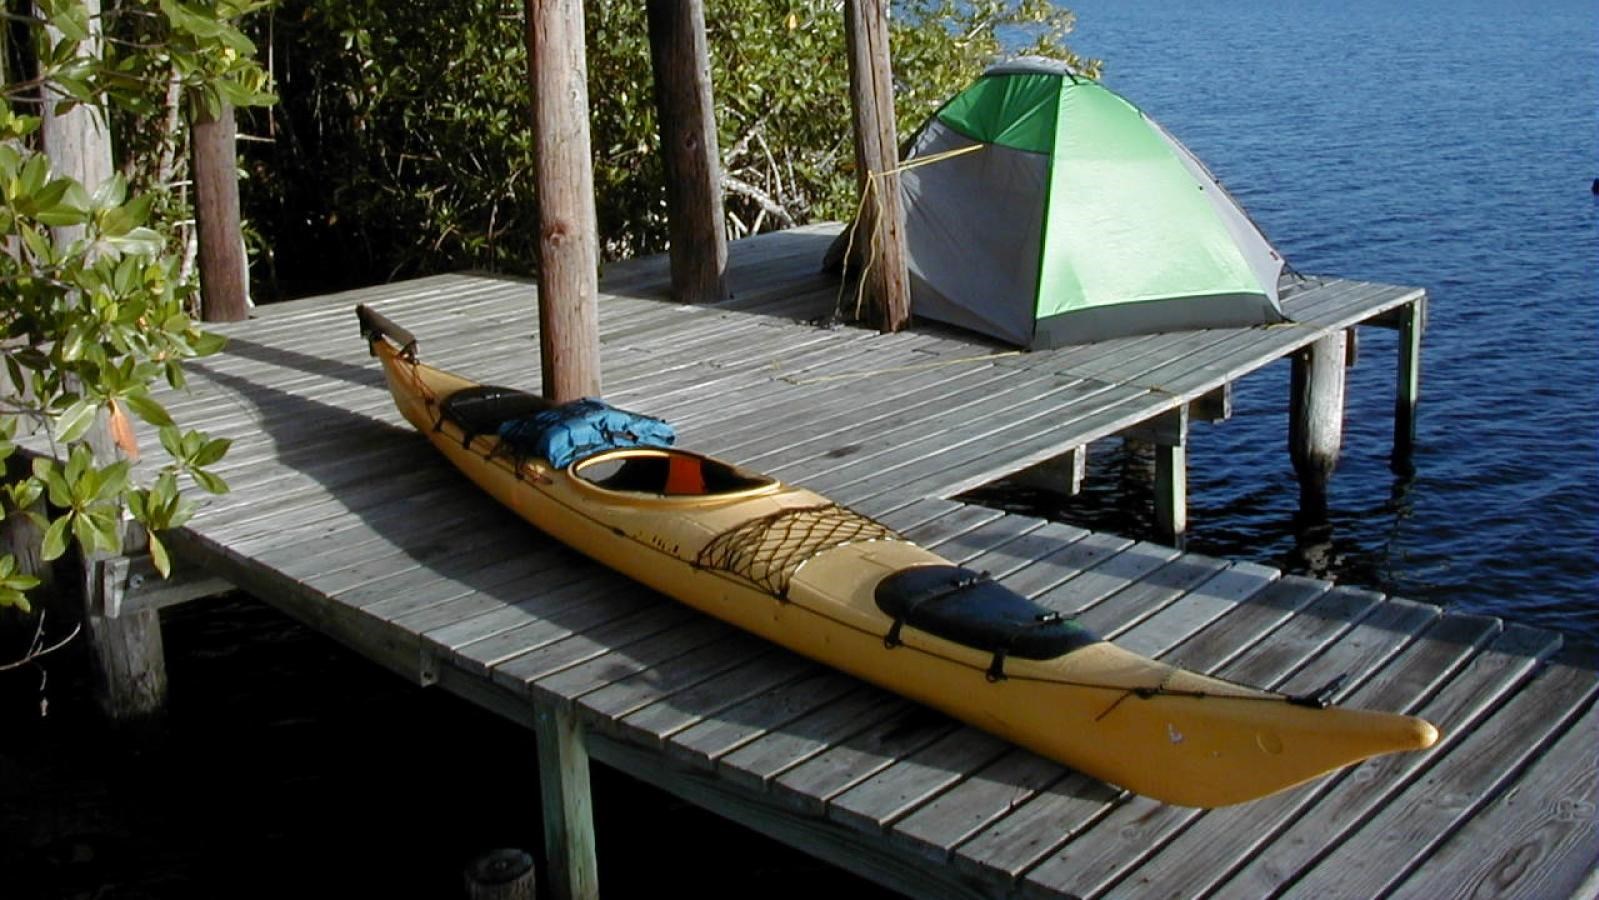 A yellow kayak sits atop a wooden platform above the water. A green tent is behind it